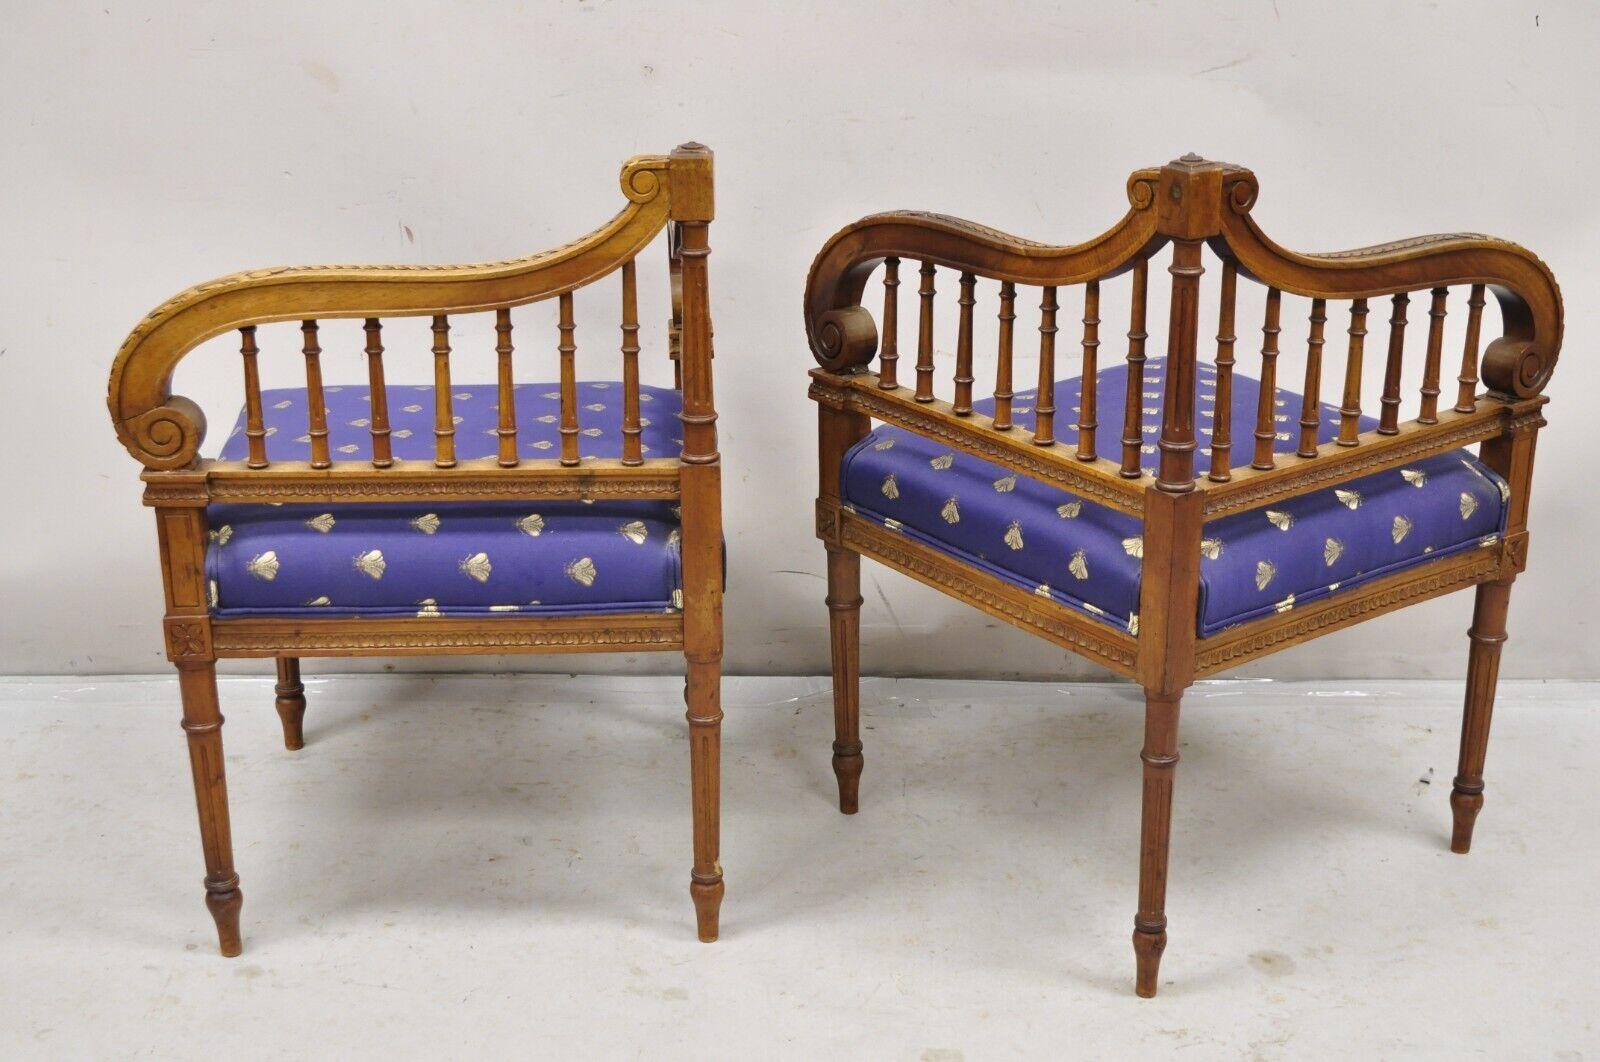 Antique French Louis XVI Style Carved Walnut Lyre Harp Corner Chairs - a Pair For Sale 5